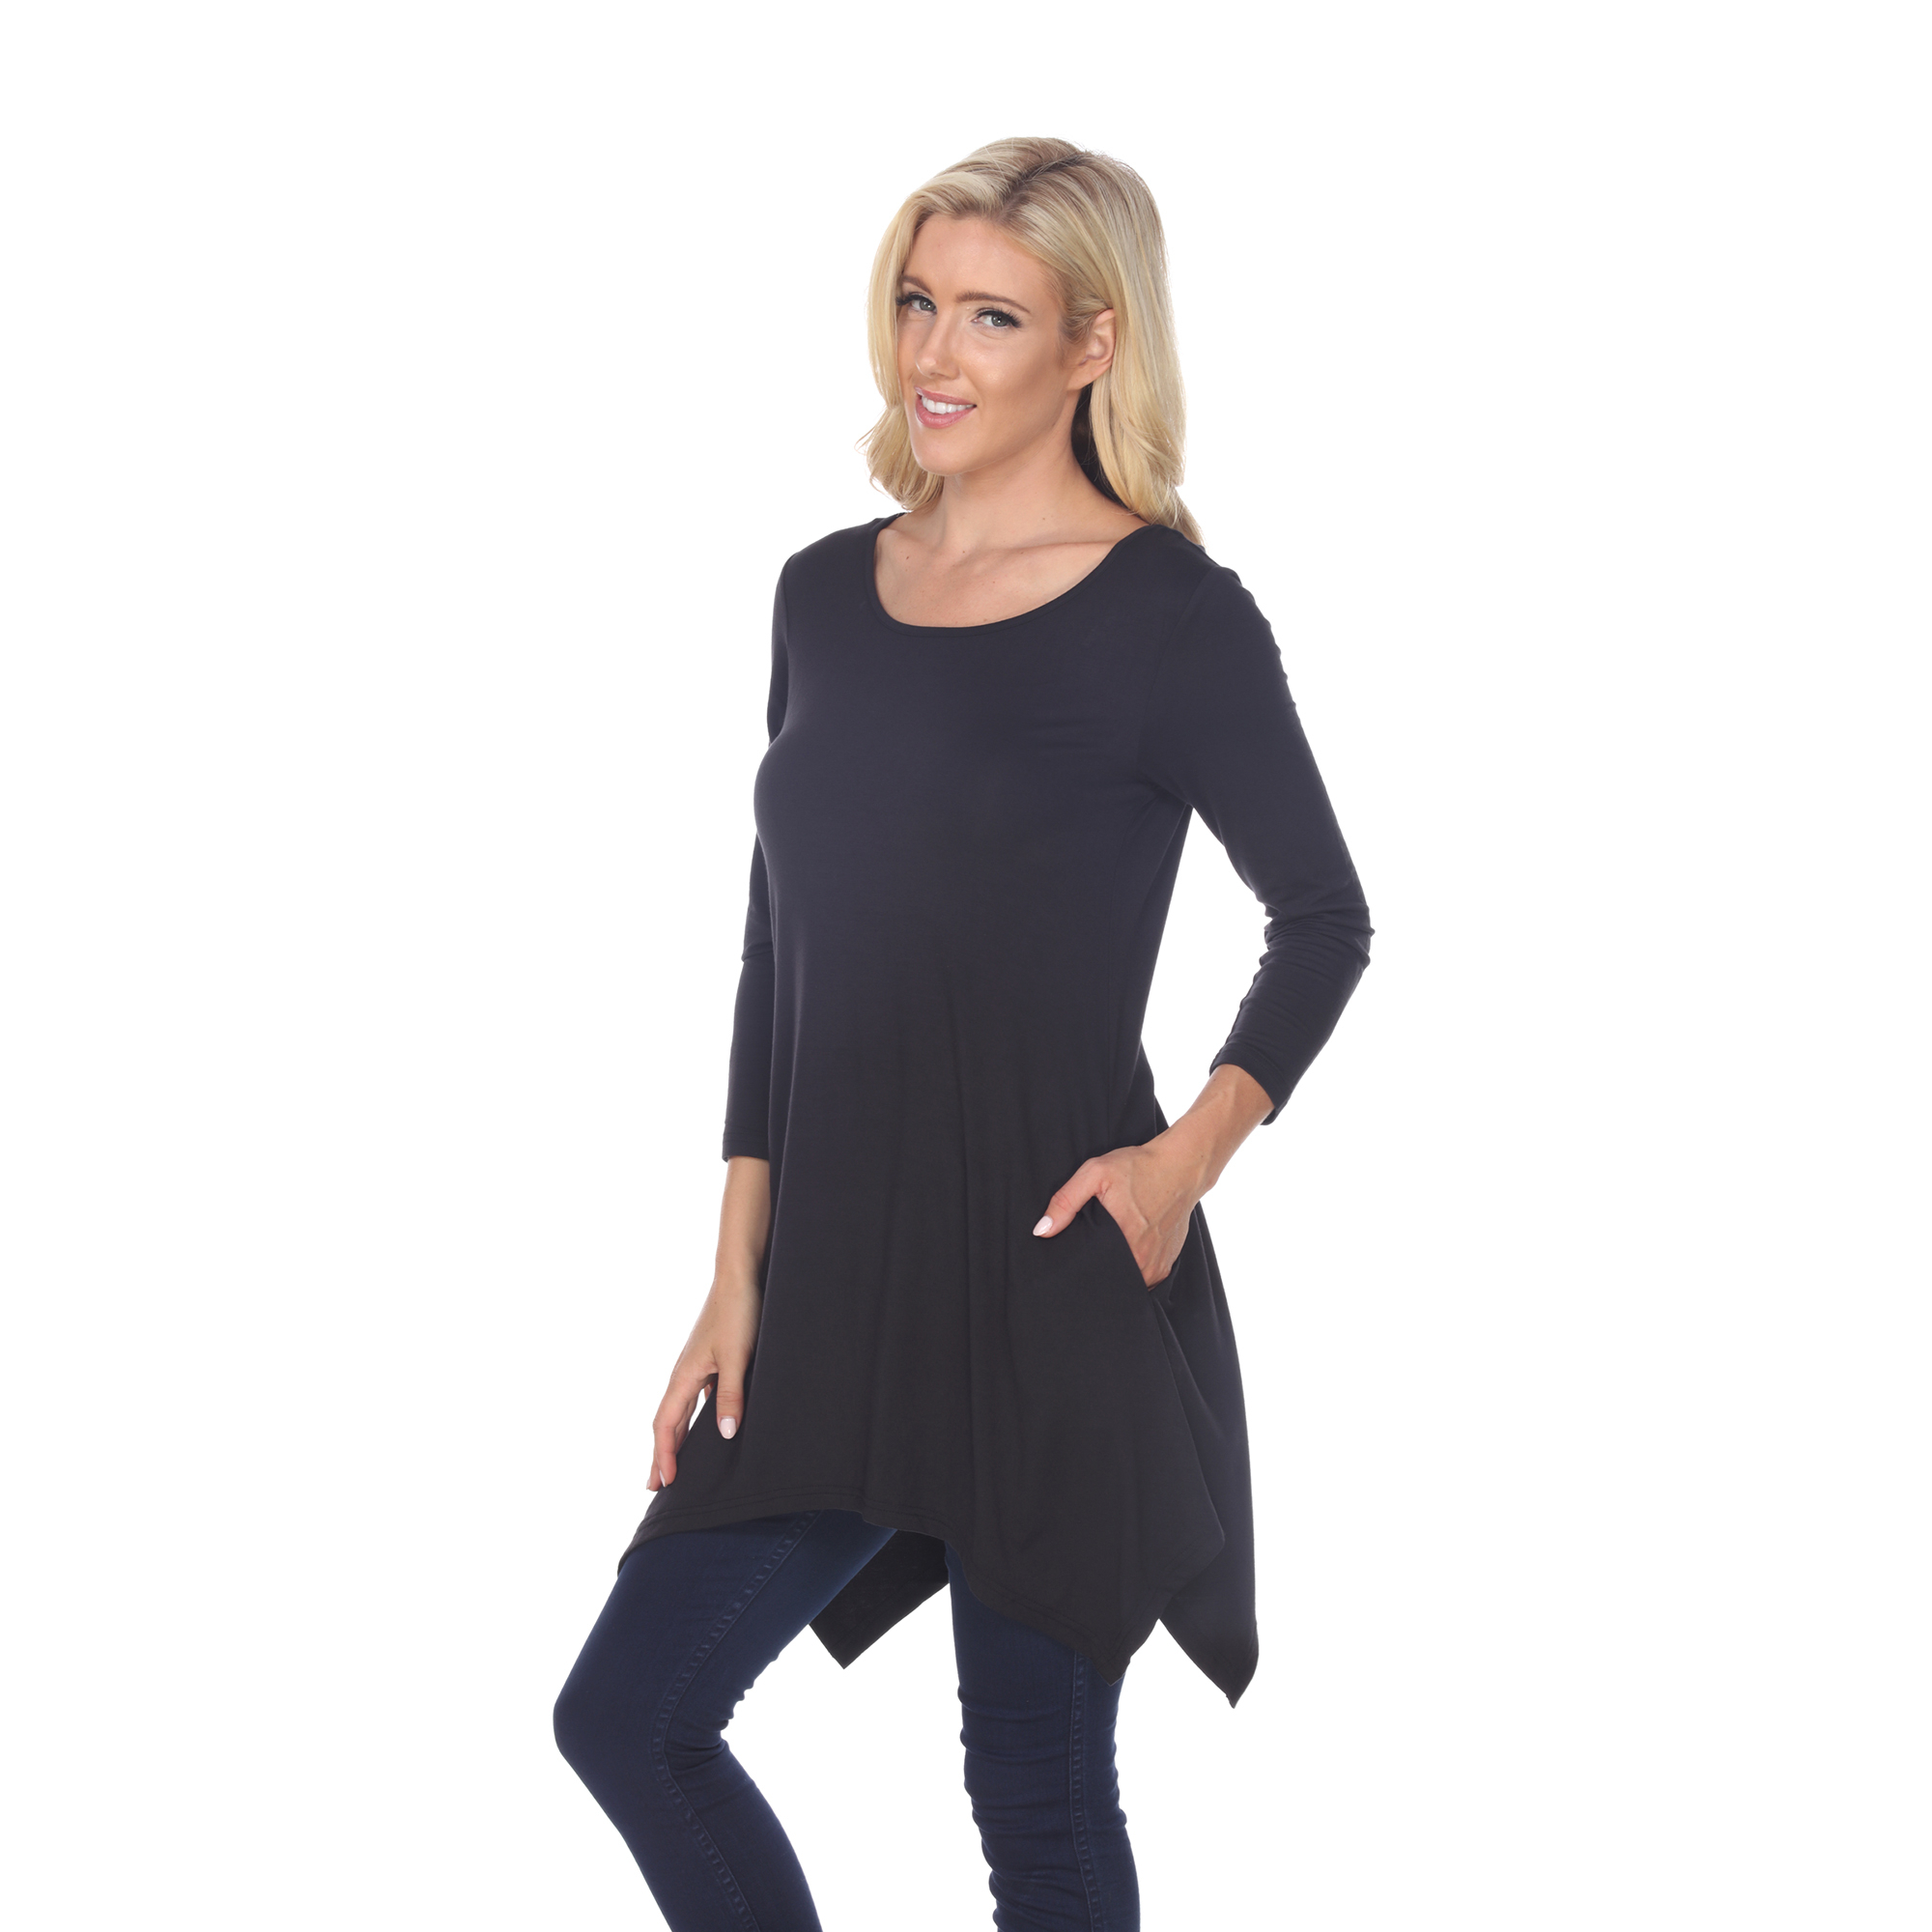 White Mark Women's Quarter Sleeve Tunic Top With Pockets - Charcoal, 6X